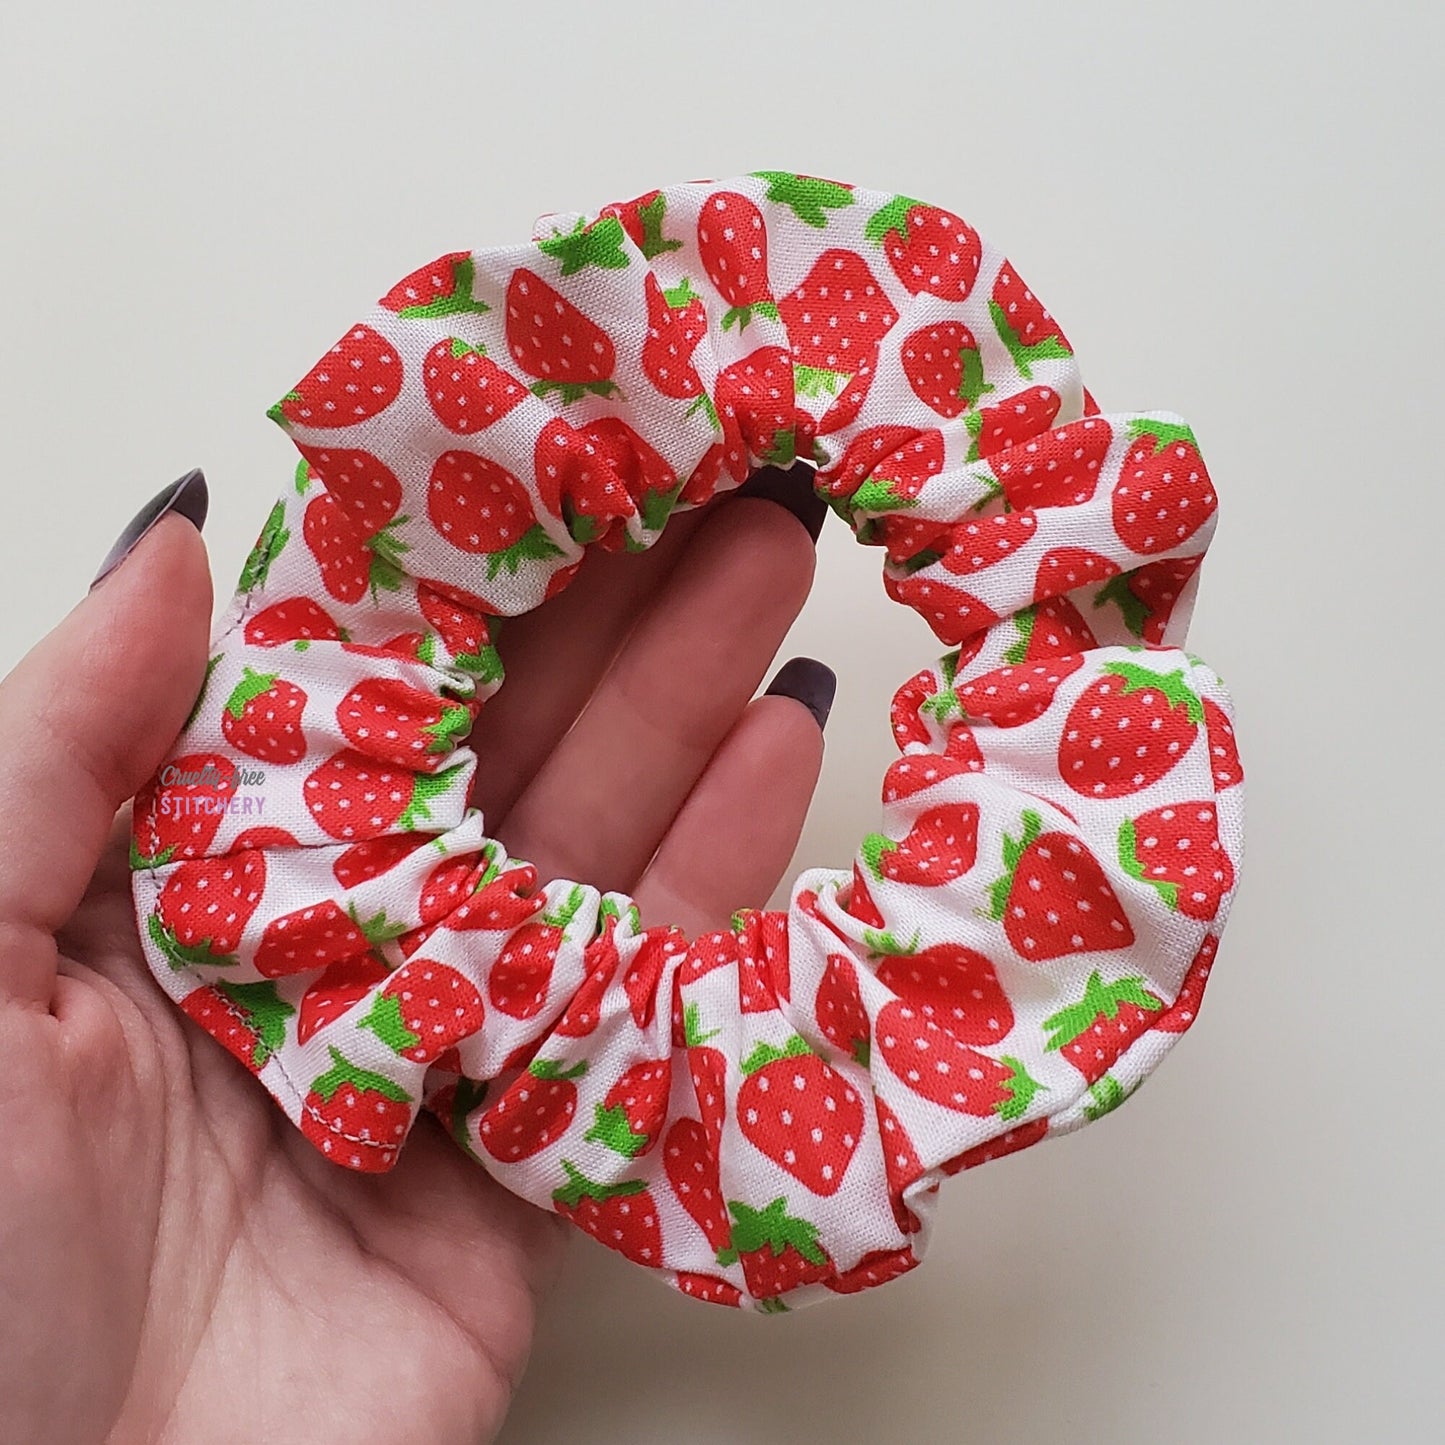 Strawberry print scrunchie in my hand to show the size. The fabric part is the width of two fingers, and the entire scrunchie is as wide as my fingers and half of my palm.